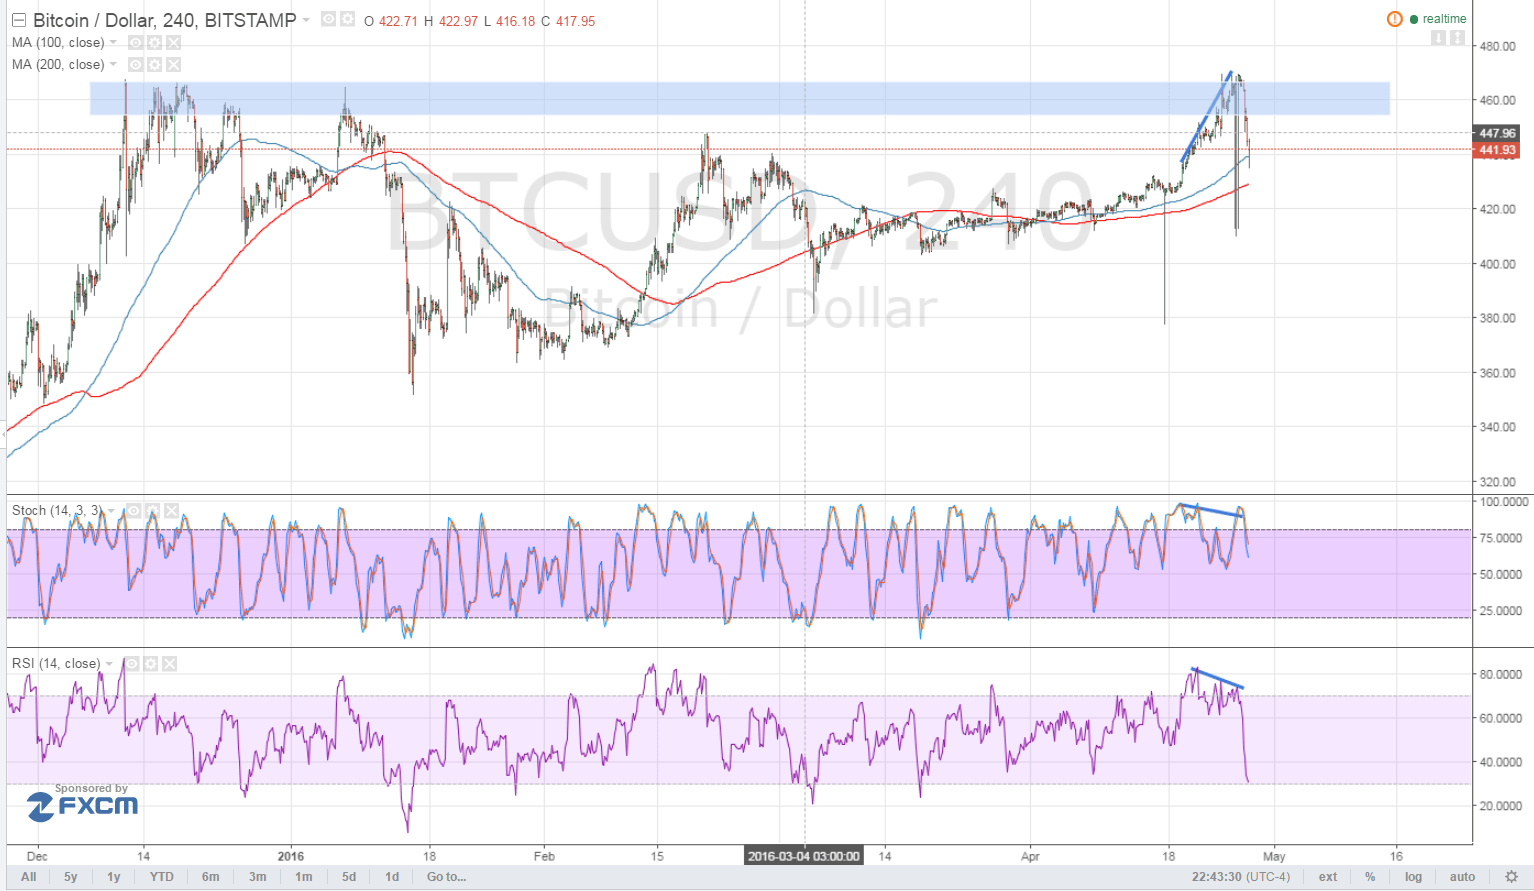 Bitcoin Price Technical Analysis for 04/28/2016 - Bears Are Back!